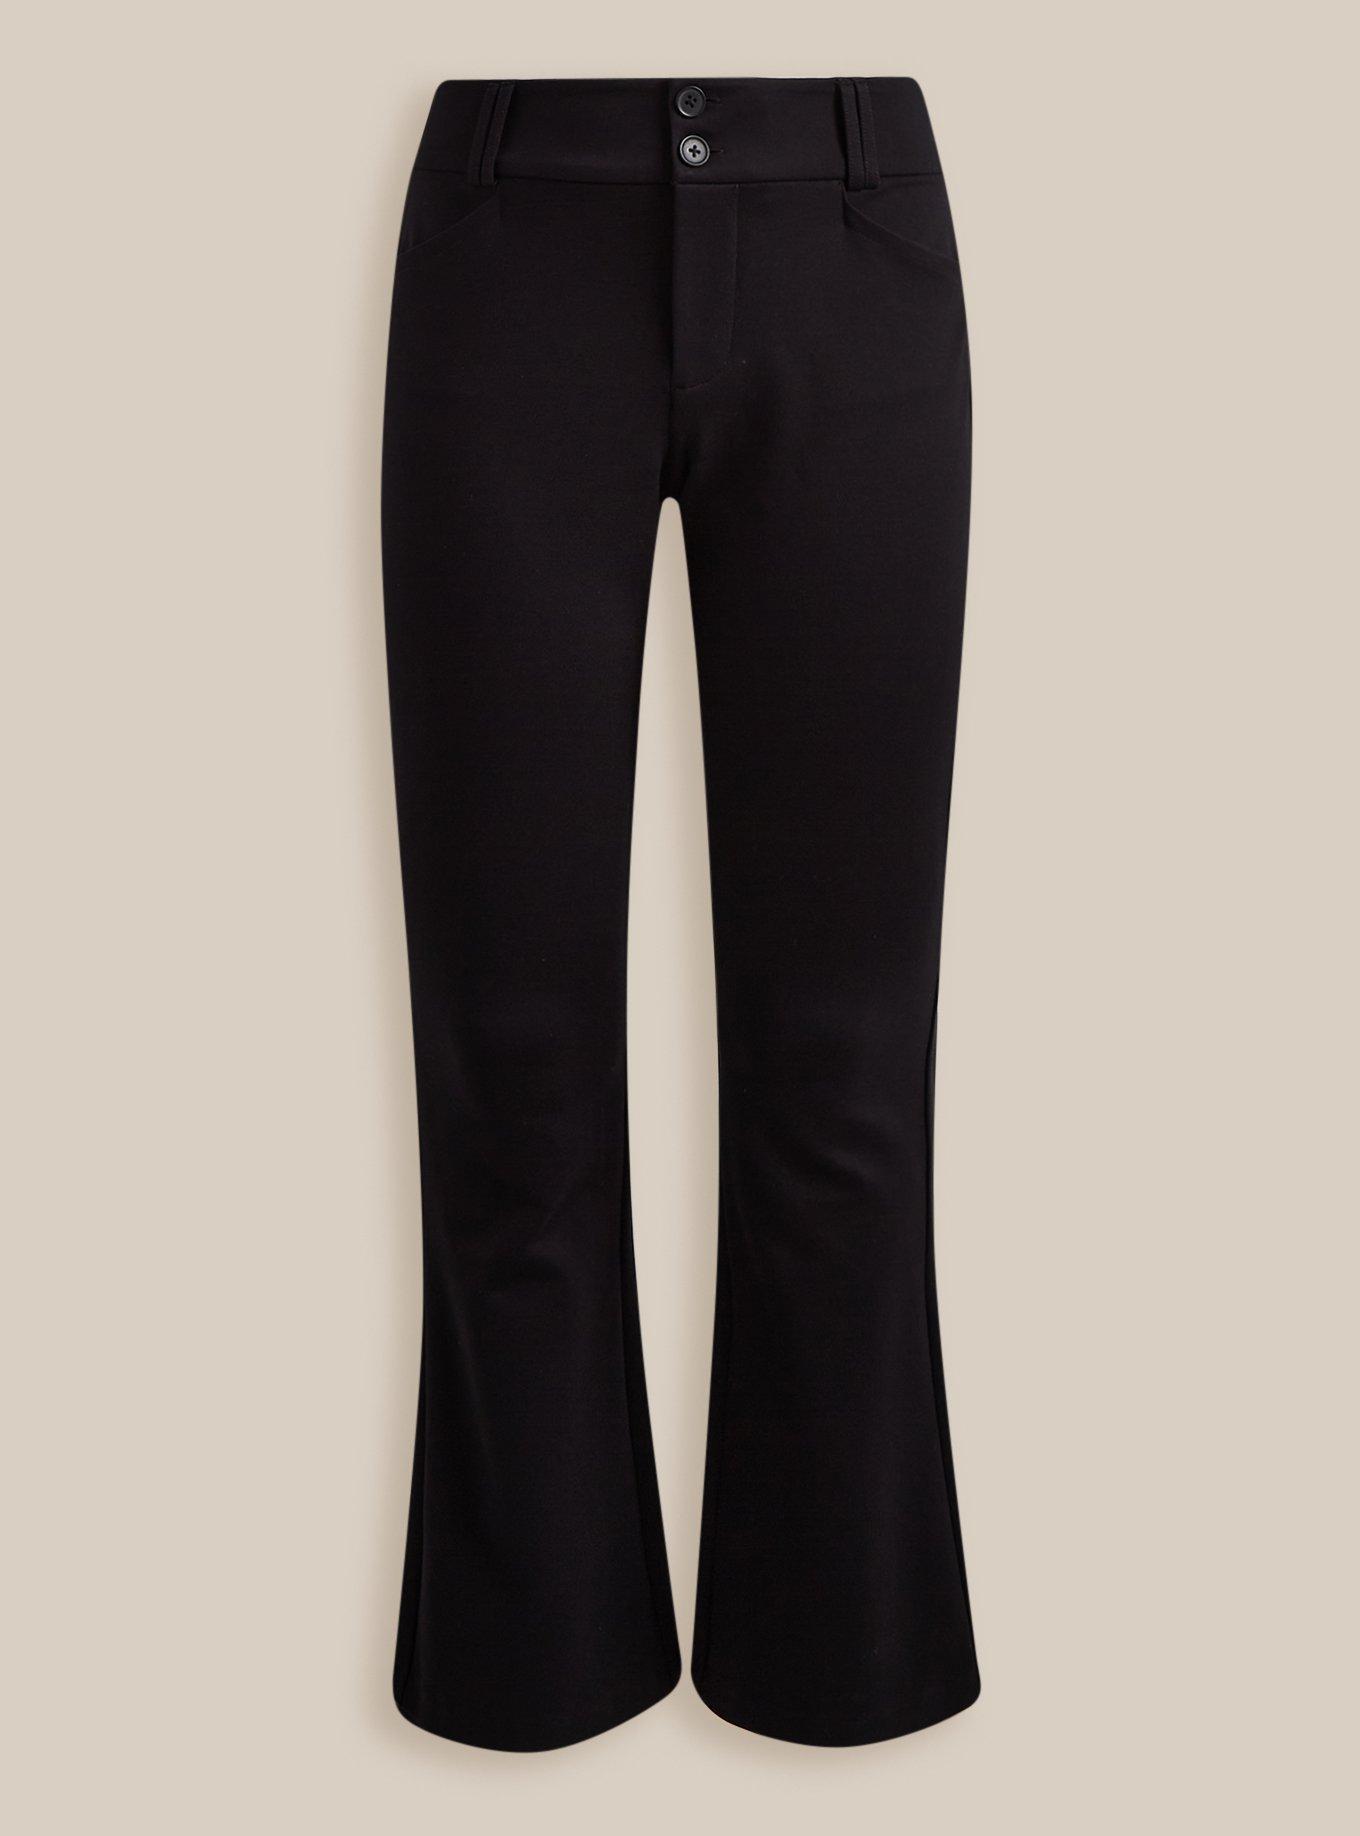 SOLD Betabrand Bootcut 6-Button Dress Pant Yoga Pa